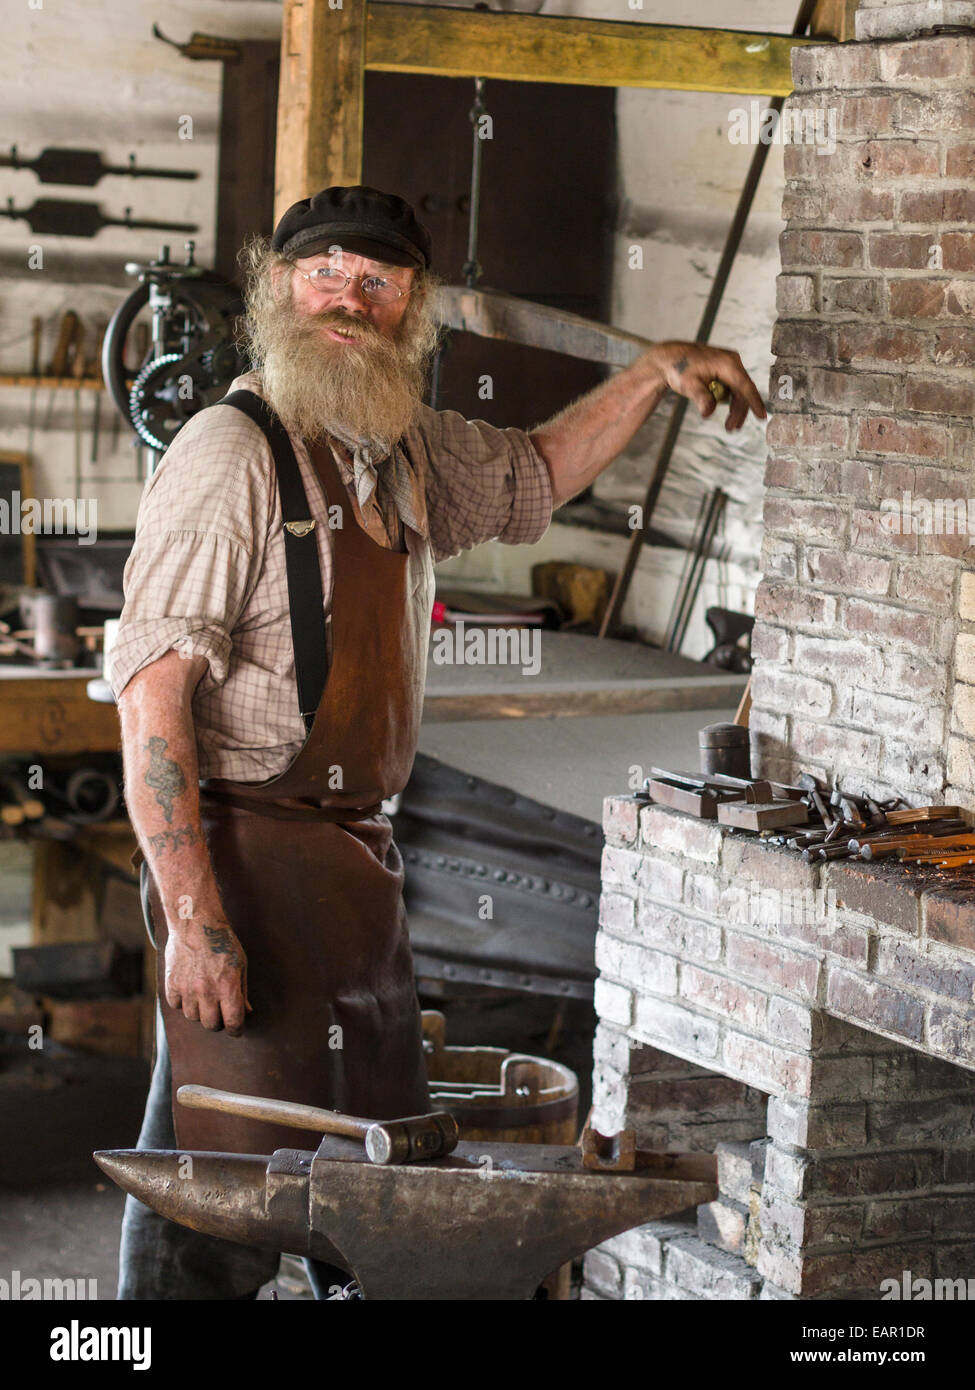 Blacksmith working the Bellows. A Blacksmith operates the bellows to raise the temperature of the fire for working iron Stock Photo